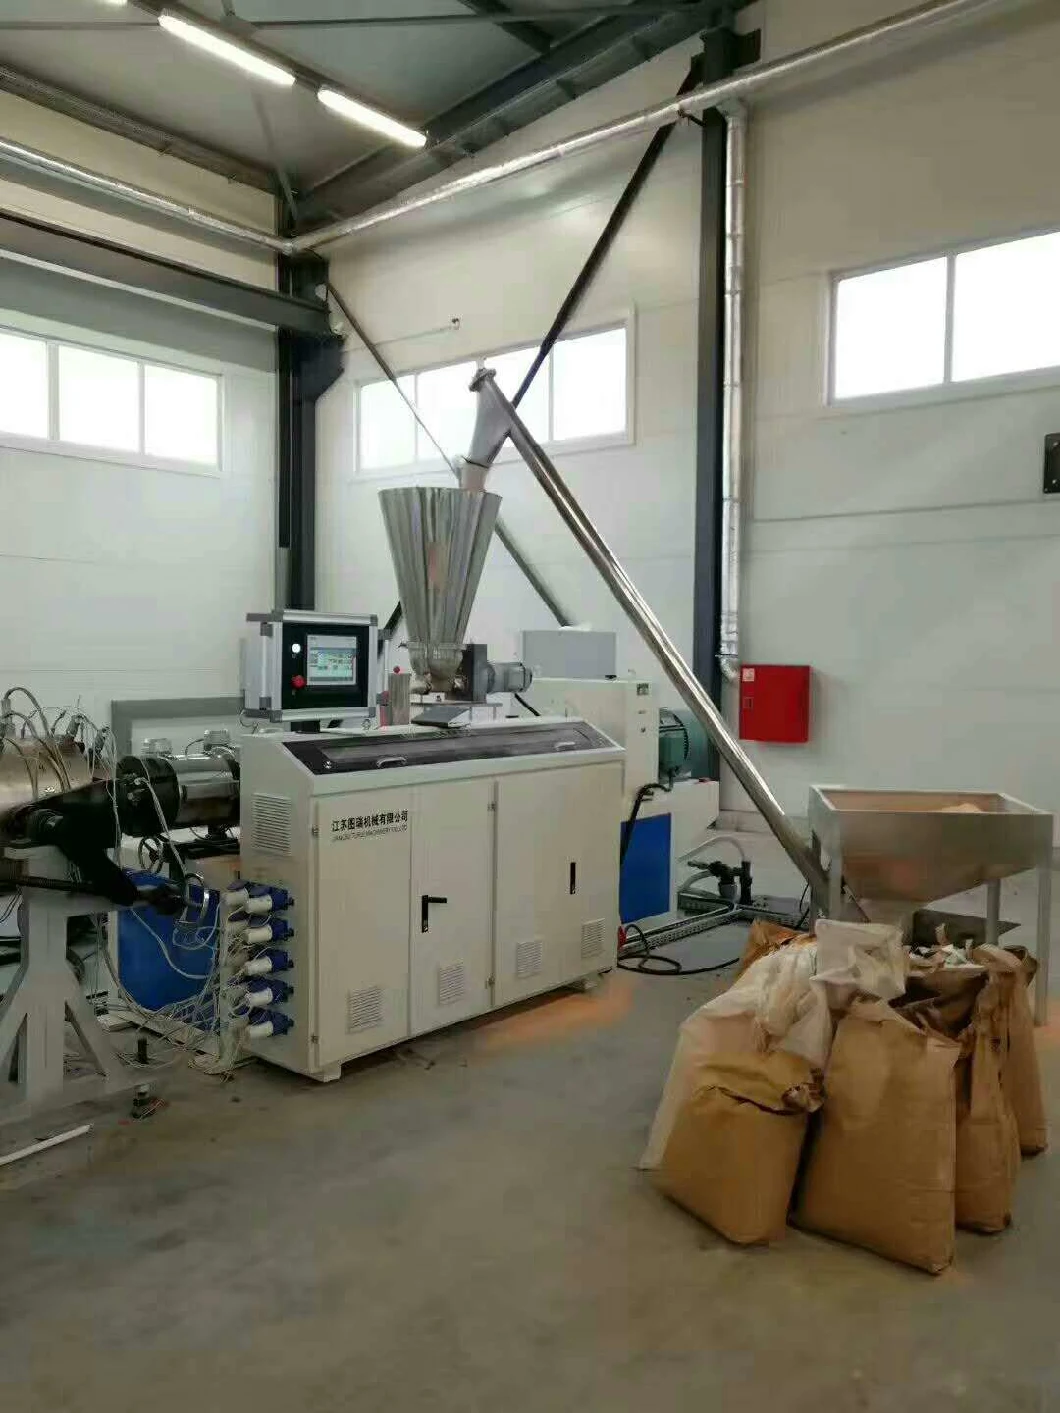 Plastic Products Machine/Plastic Machinery Composed of Conical Twin-Screw Extruder and Haul off